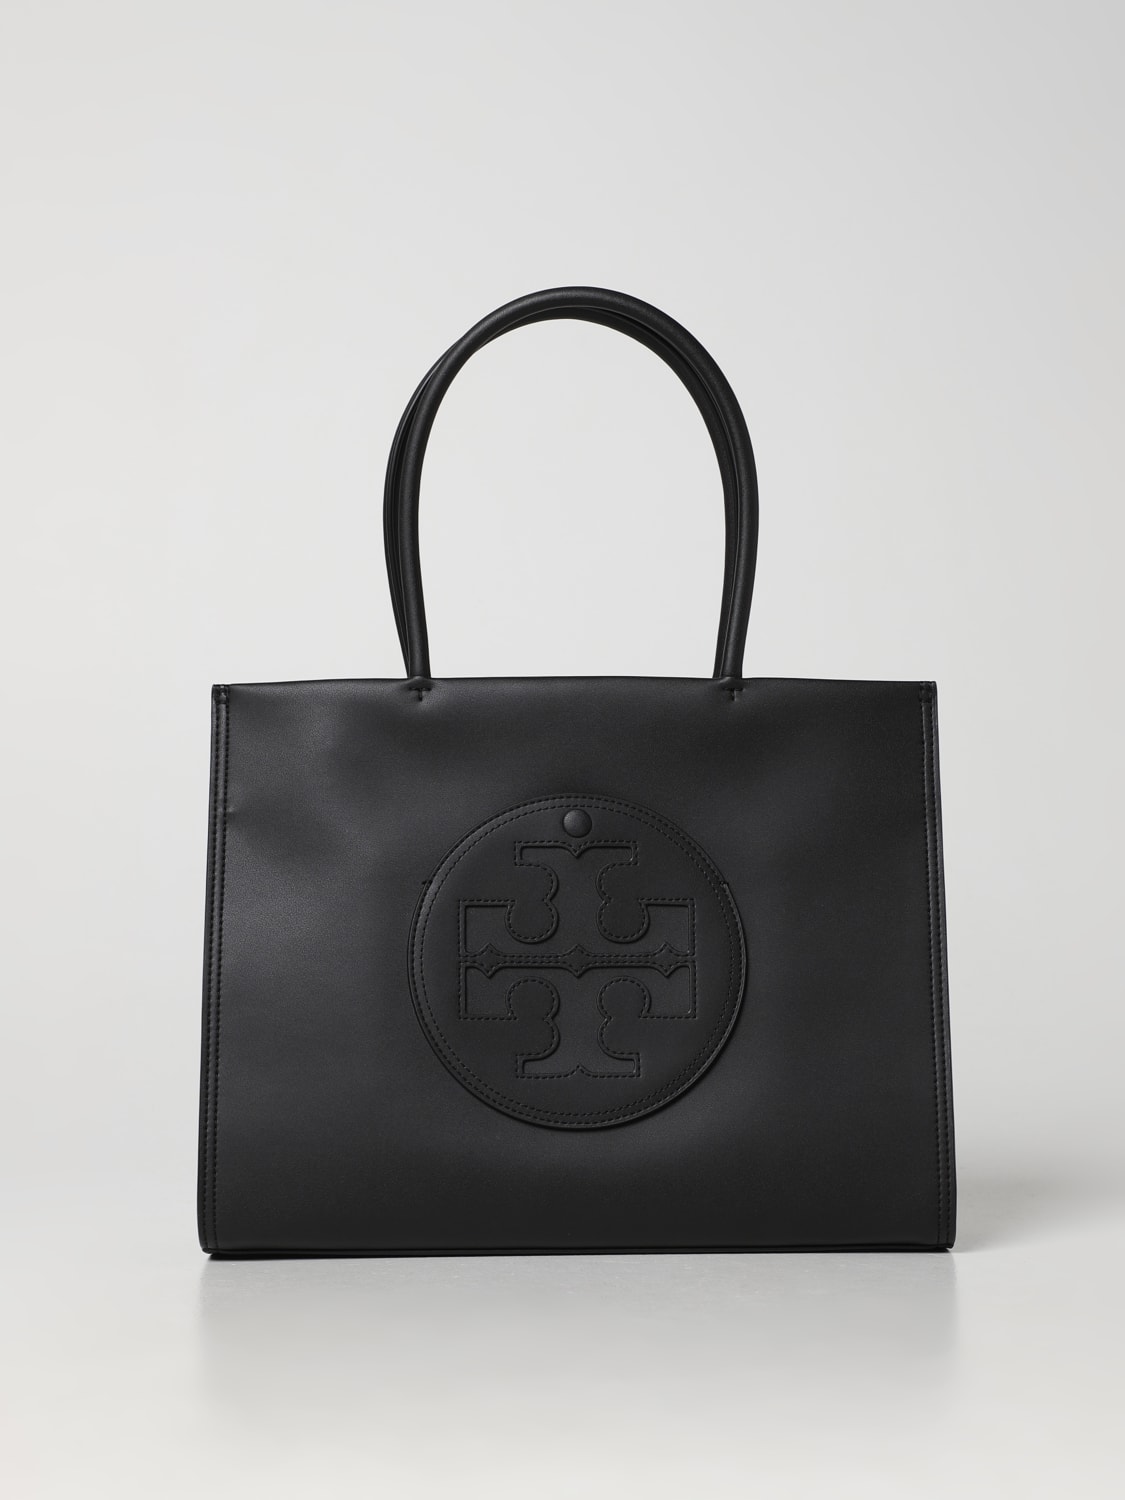 Tory Burch Outlet: Ella bag in synthetic leather - Black